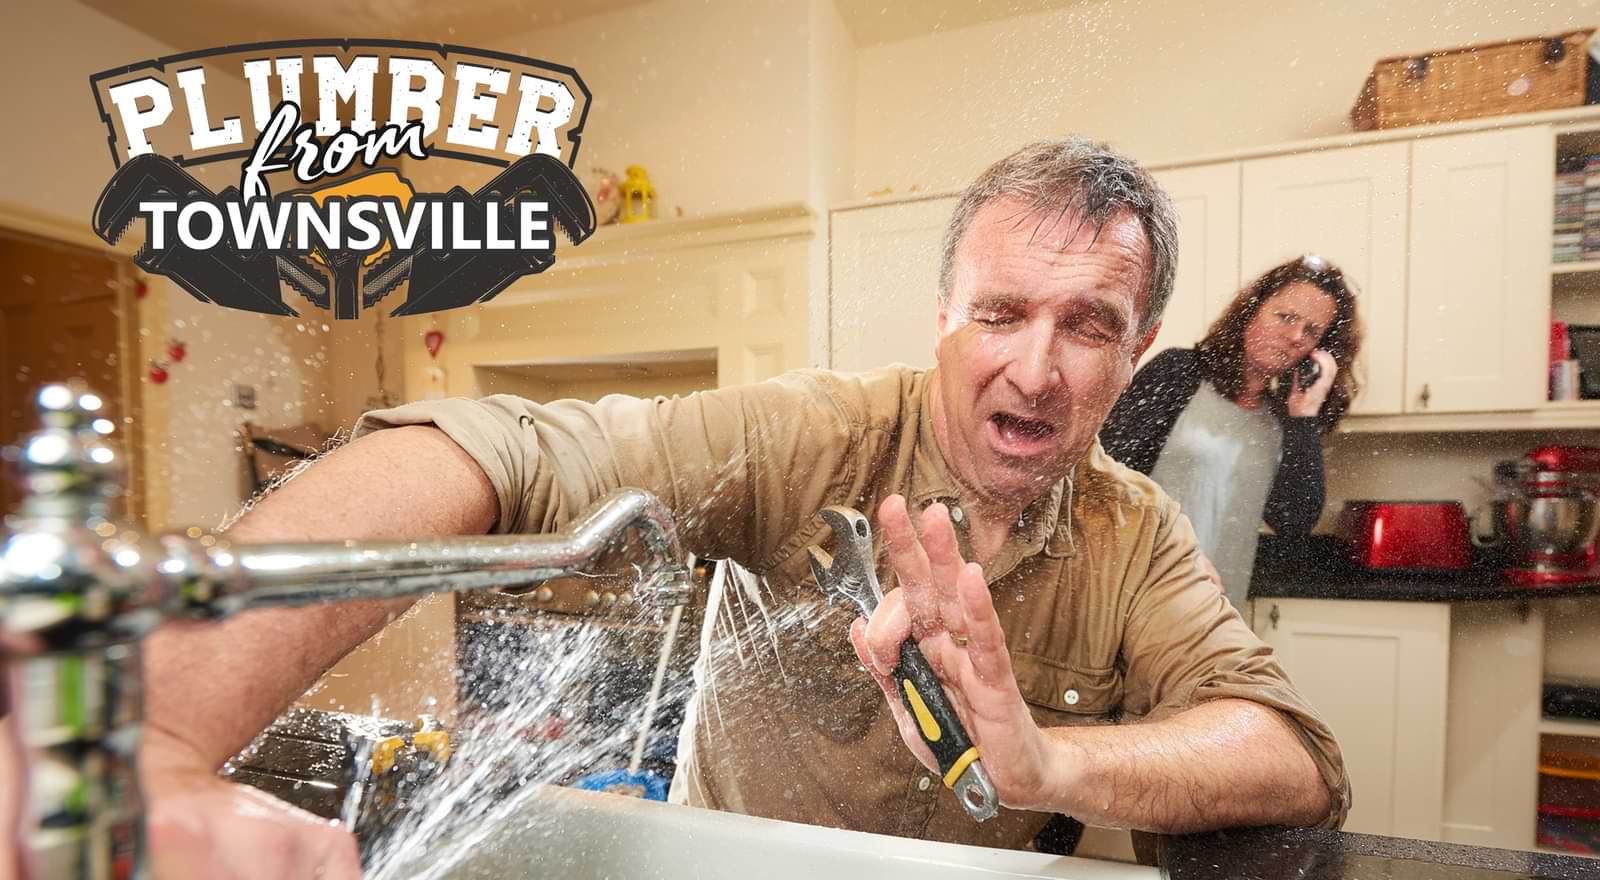 Plumber From Townsville - How to choose a plumber